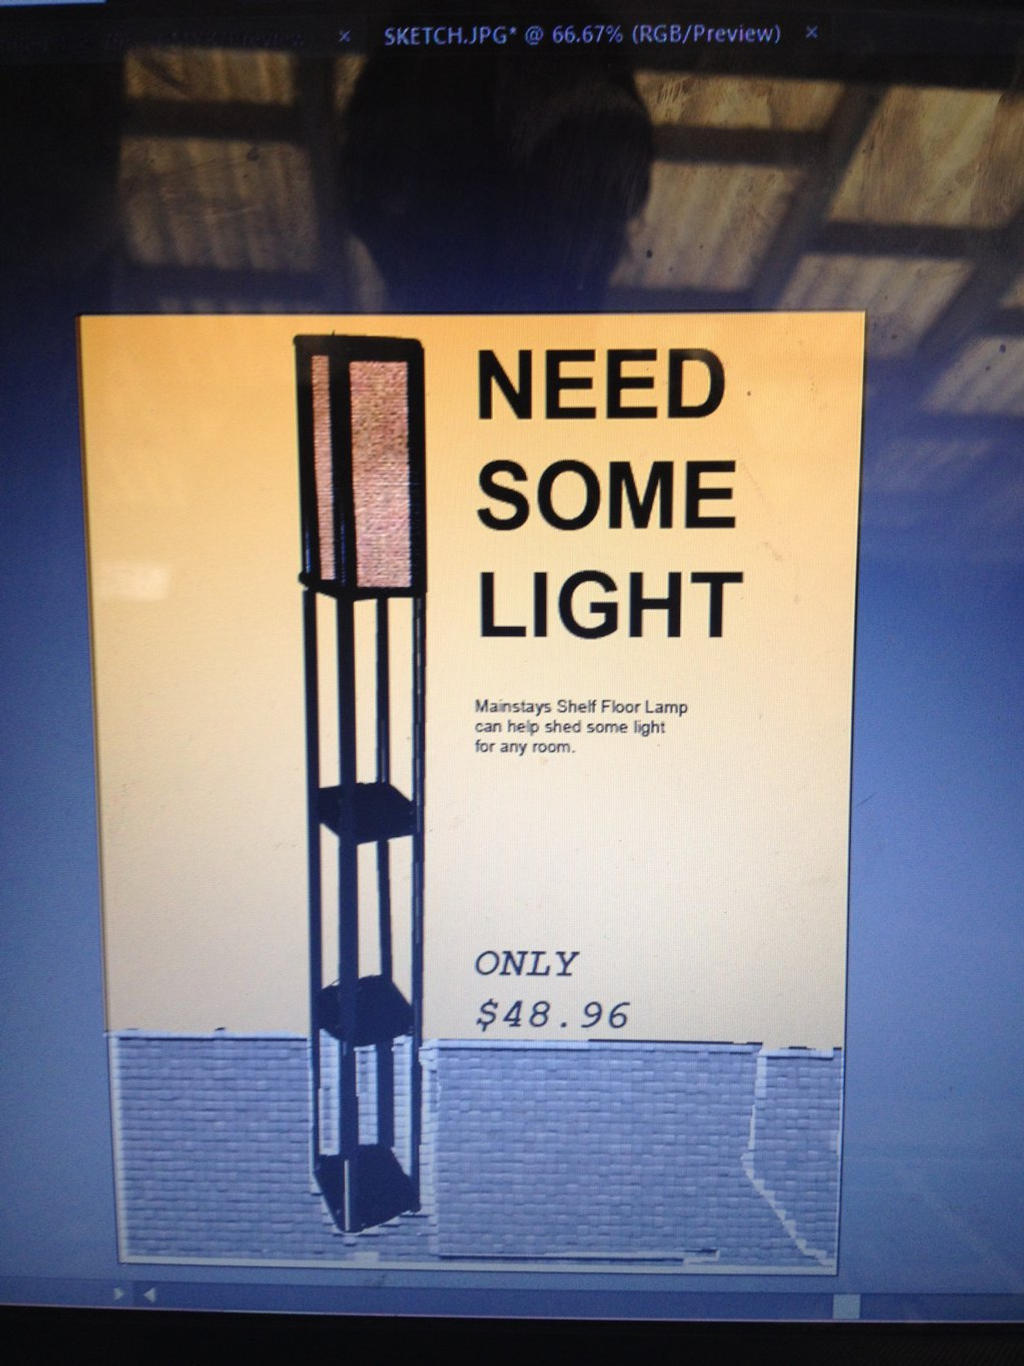 Lamp advertisement course project